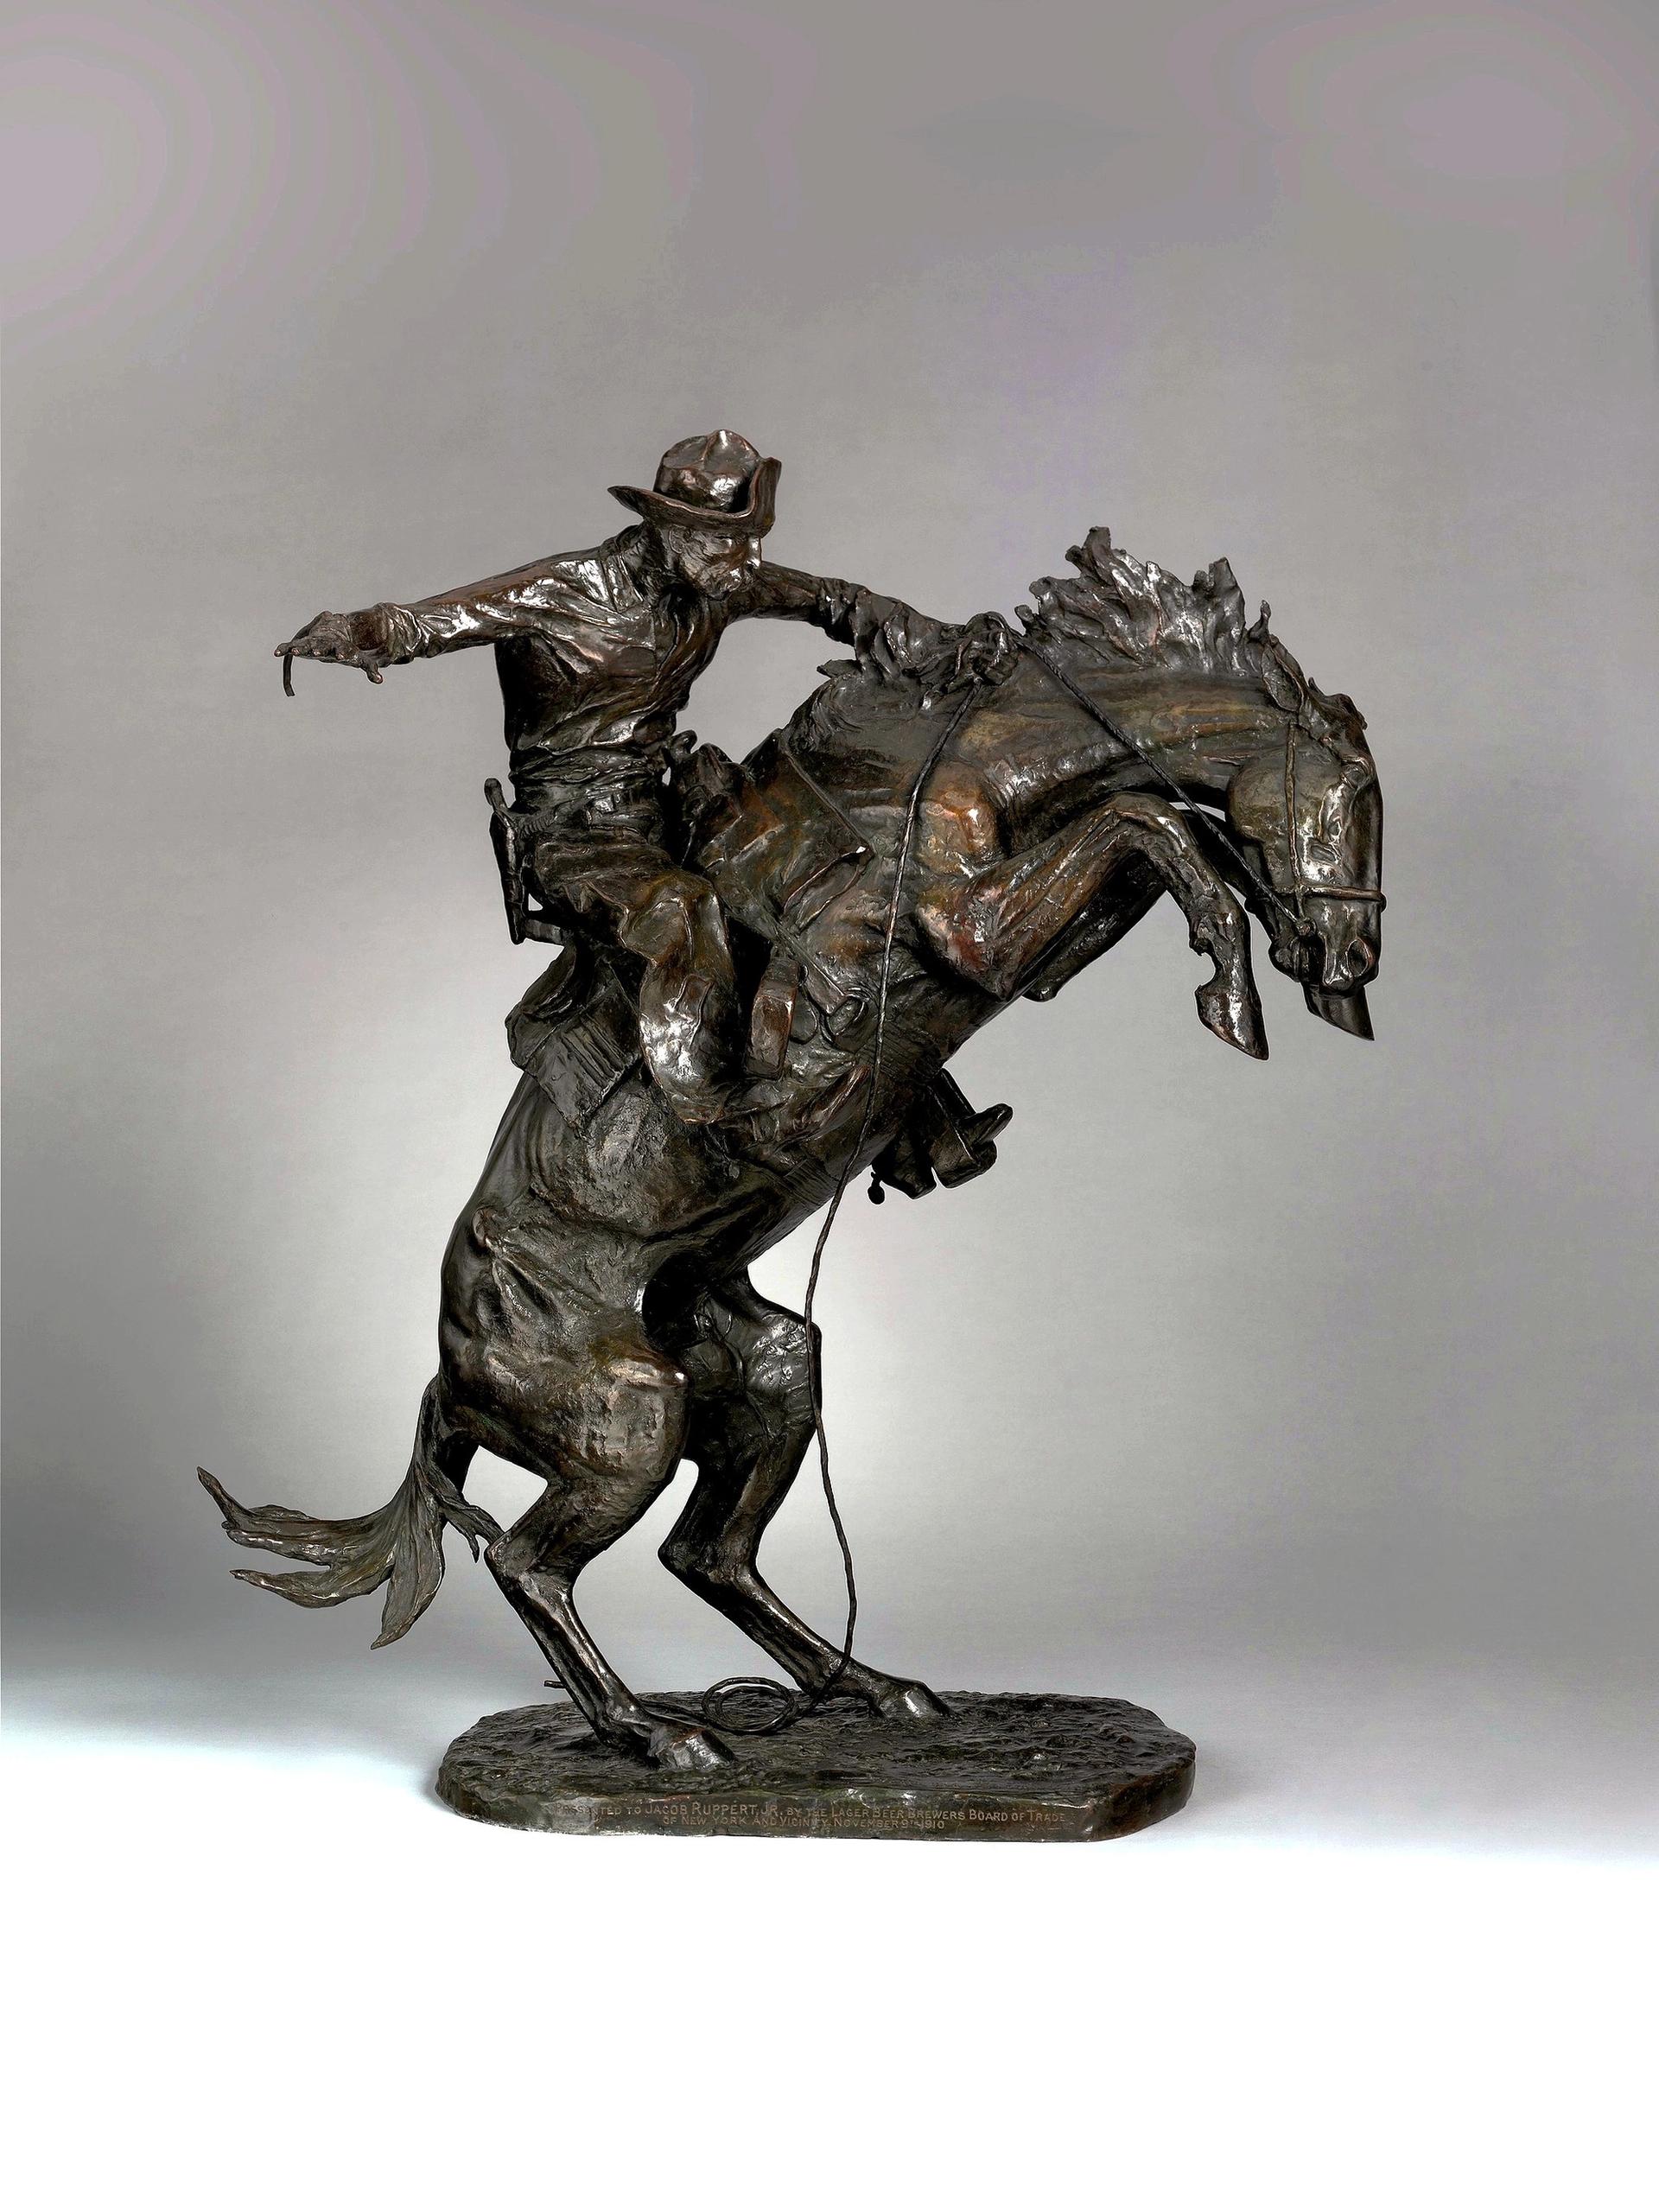 Frederic Remington's The Broncho Buster is not Teddy Roosevelt. Wikimedia